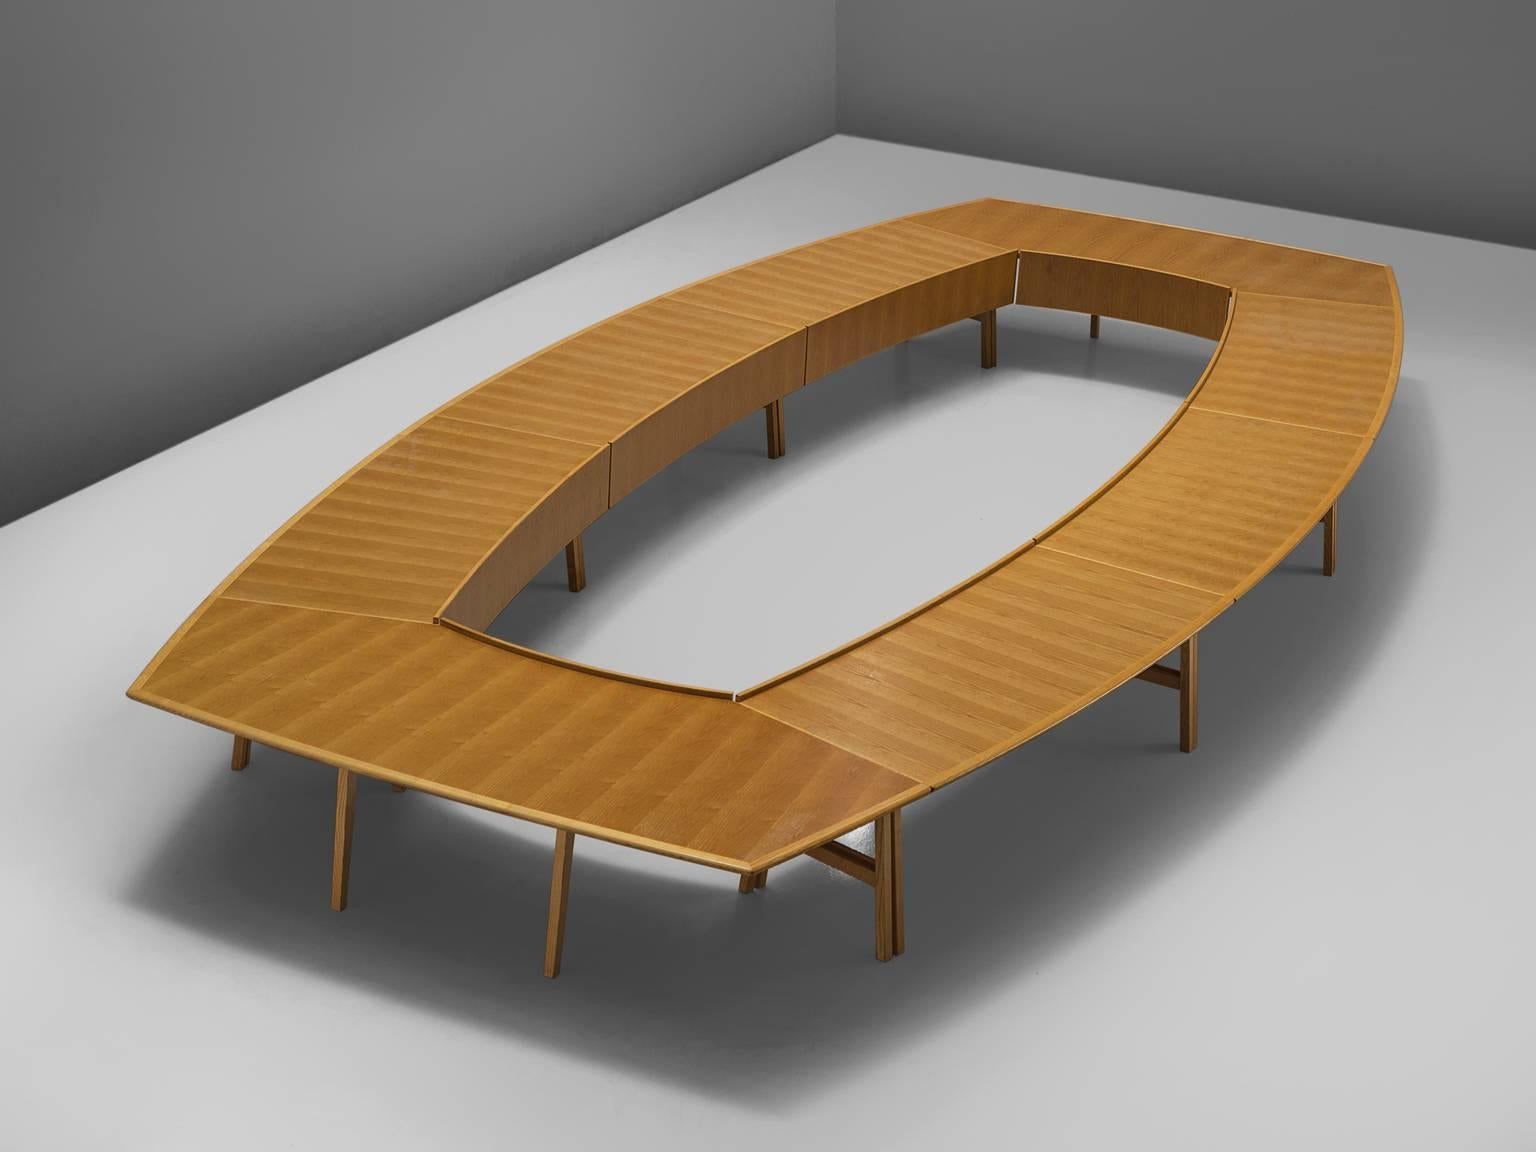 Hans Wegner for PP Møbler, conference table, ash, Denmark, 1970.

This large table was designed by Hans Wegner as a commission. The table is executed in ash and has a cornered oval shape with a large gap in the middle. The top features a pattern of